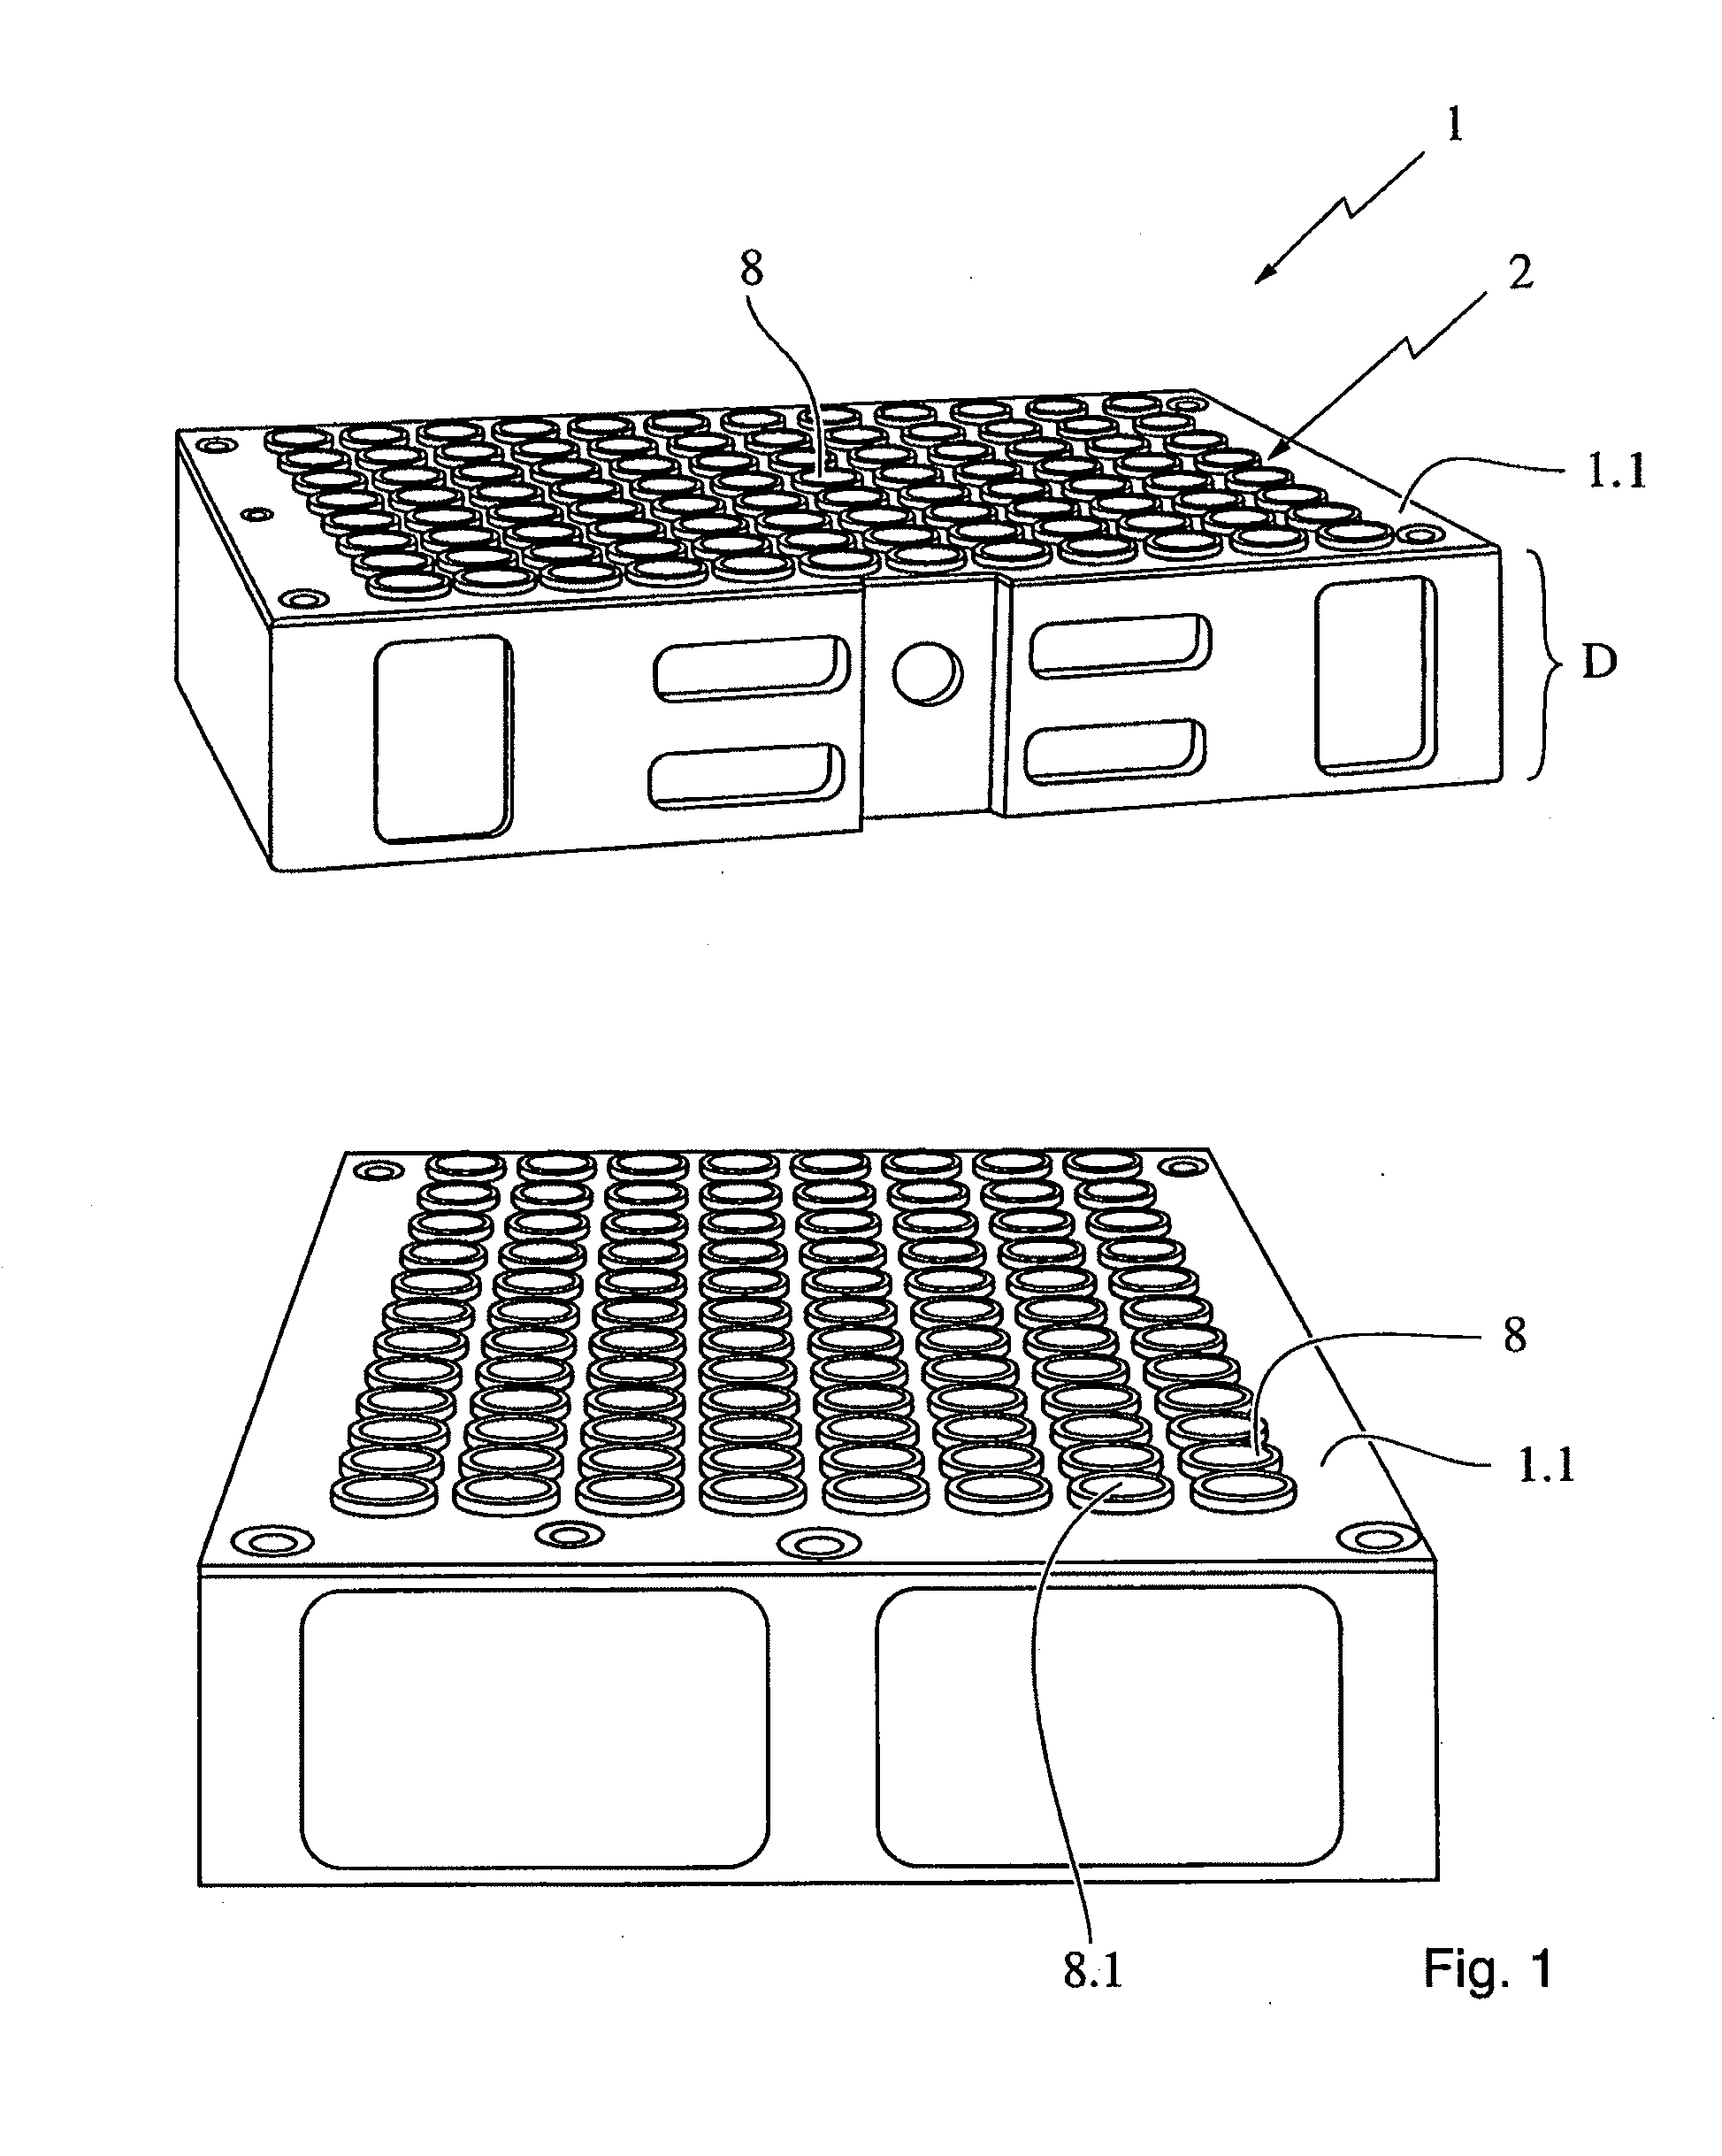 Sample Carrier and Method for Achieving Comparable Analytical Results By Aligning Test Substances on a Uniform Plane